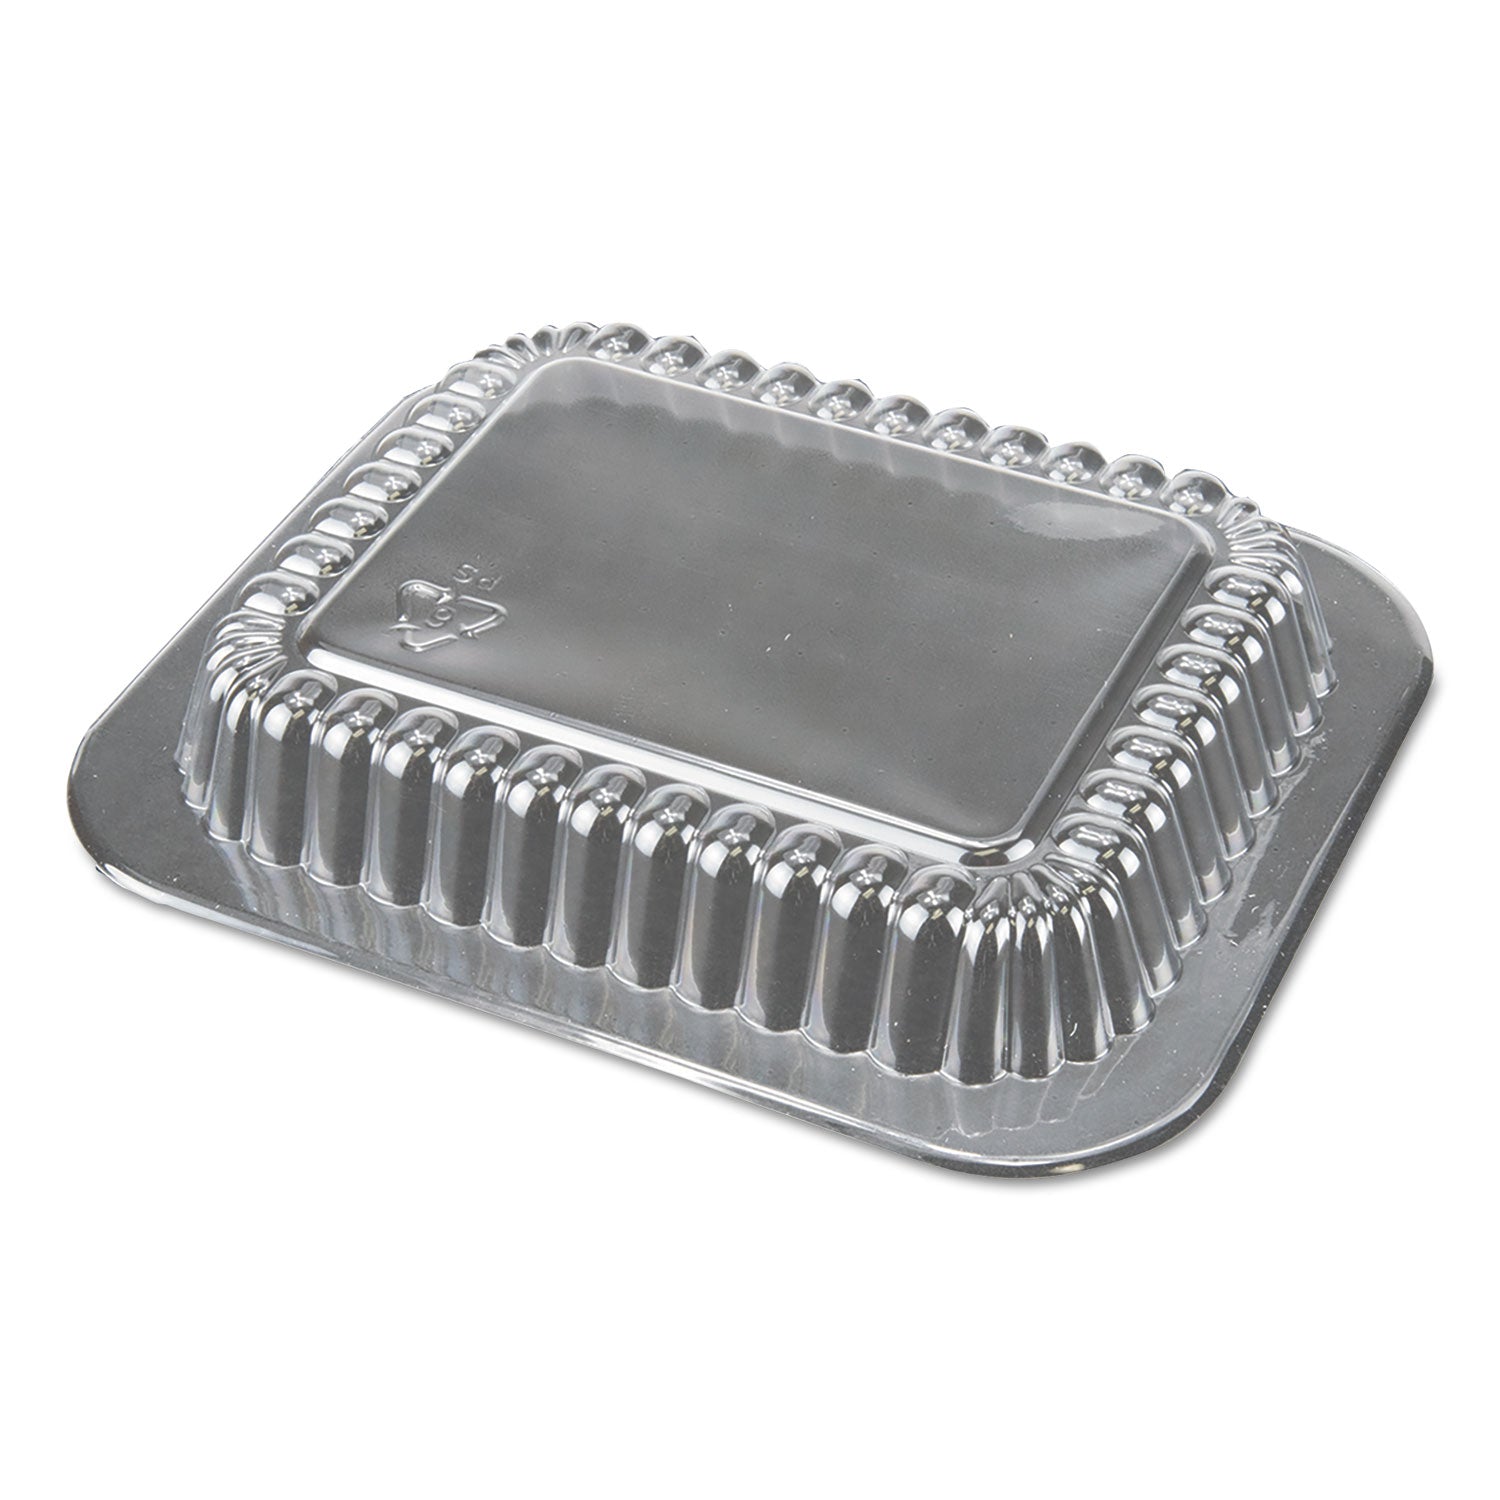 dome-lids-for-1-lb-oblong-containers-513-x-413-clear-plastic-1000-carton_dpkp2201000 - 1